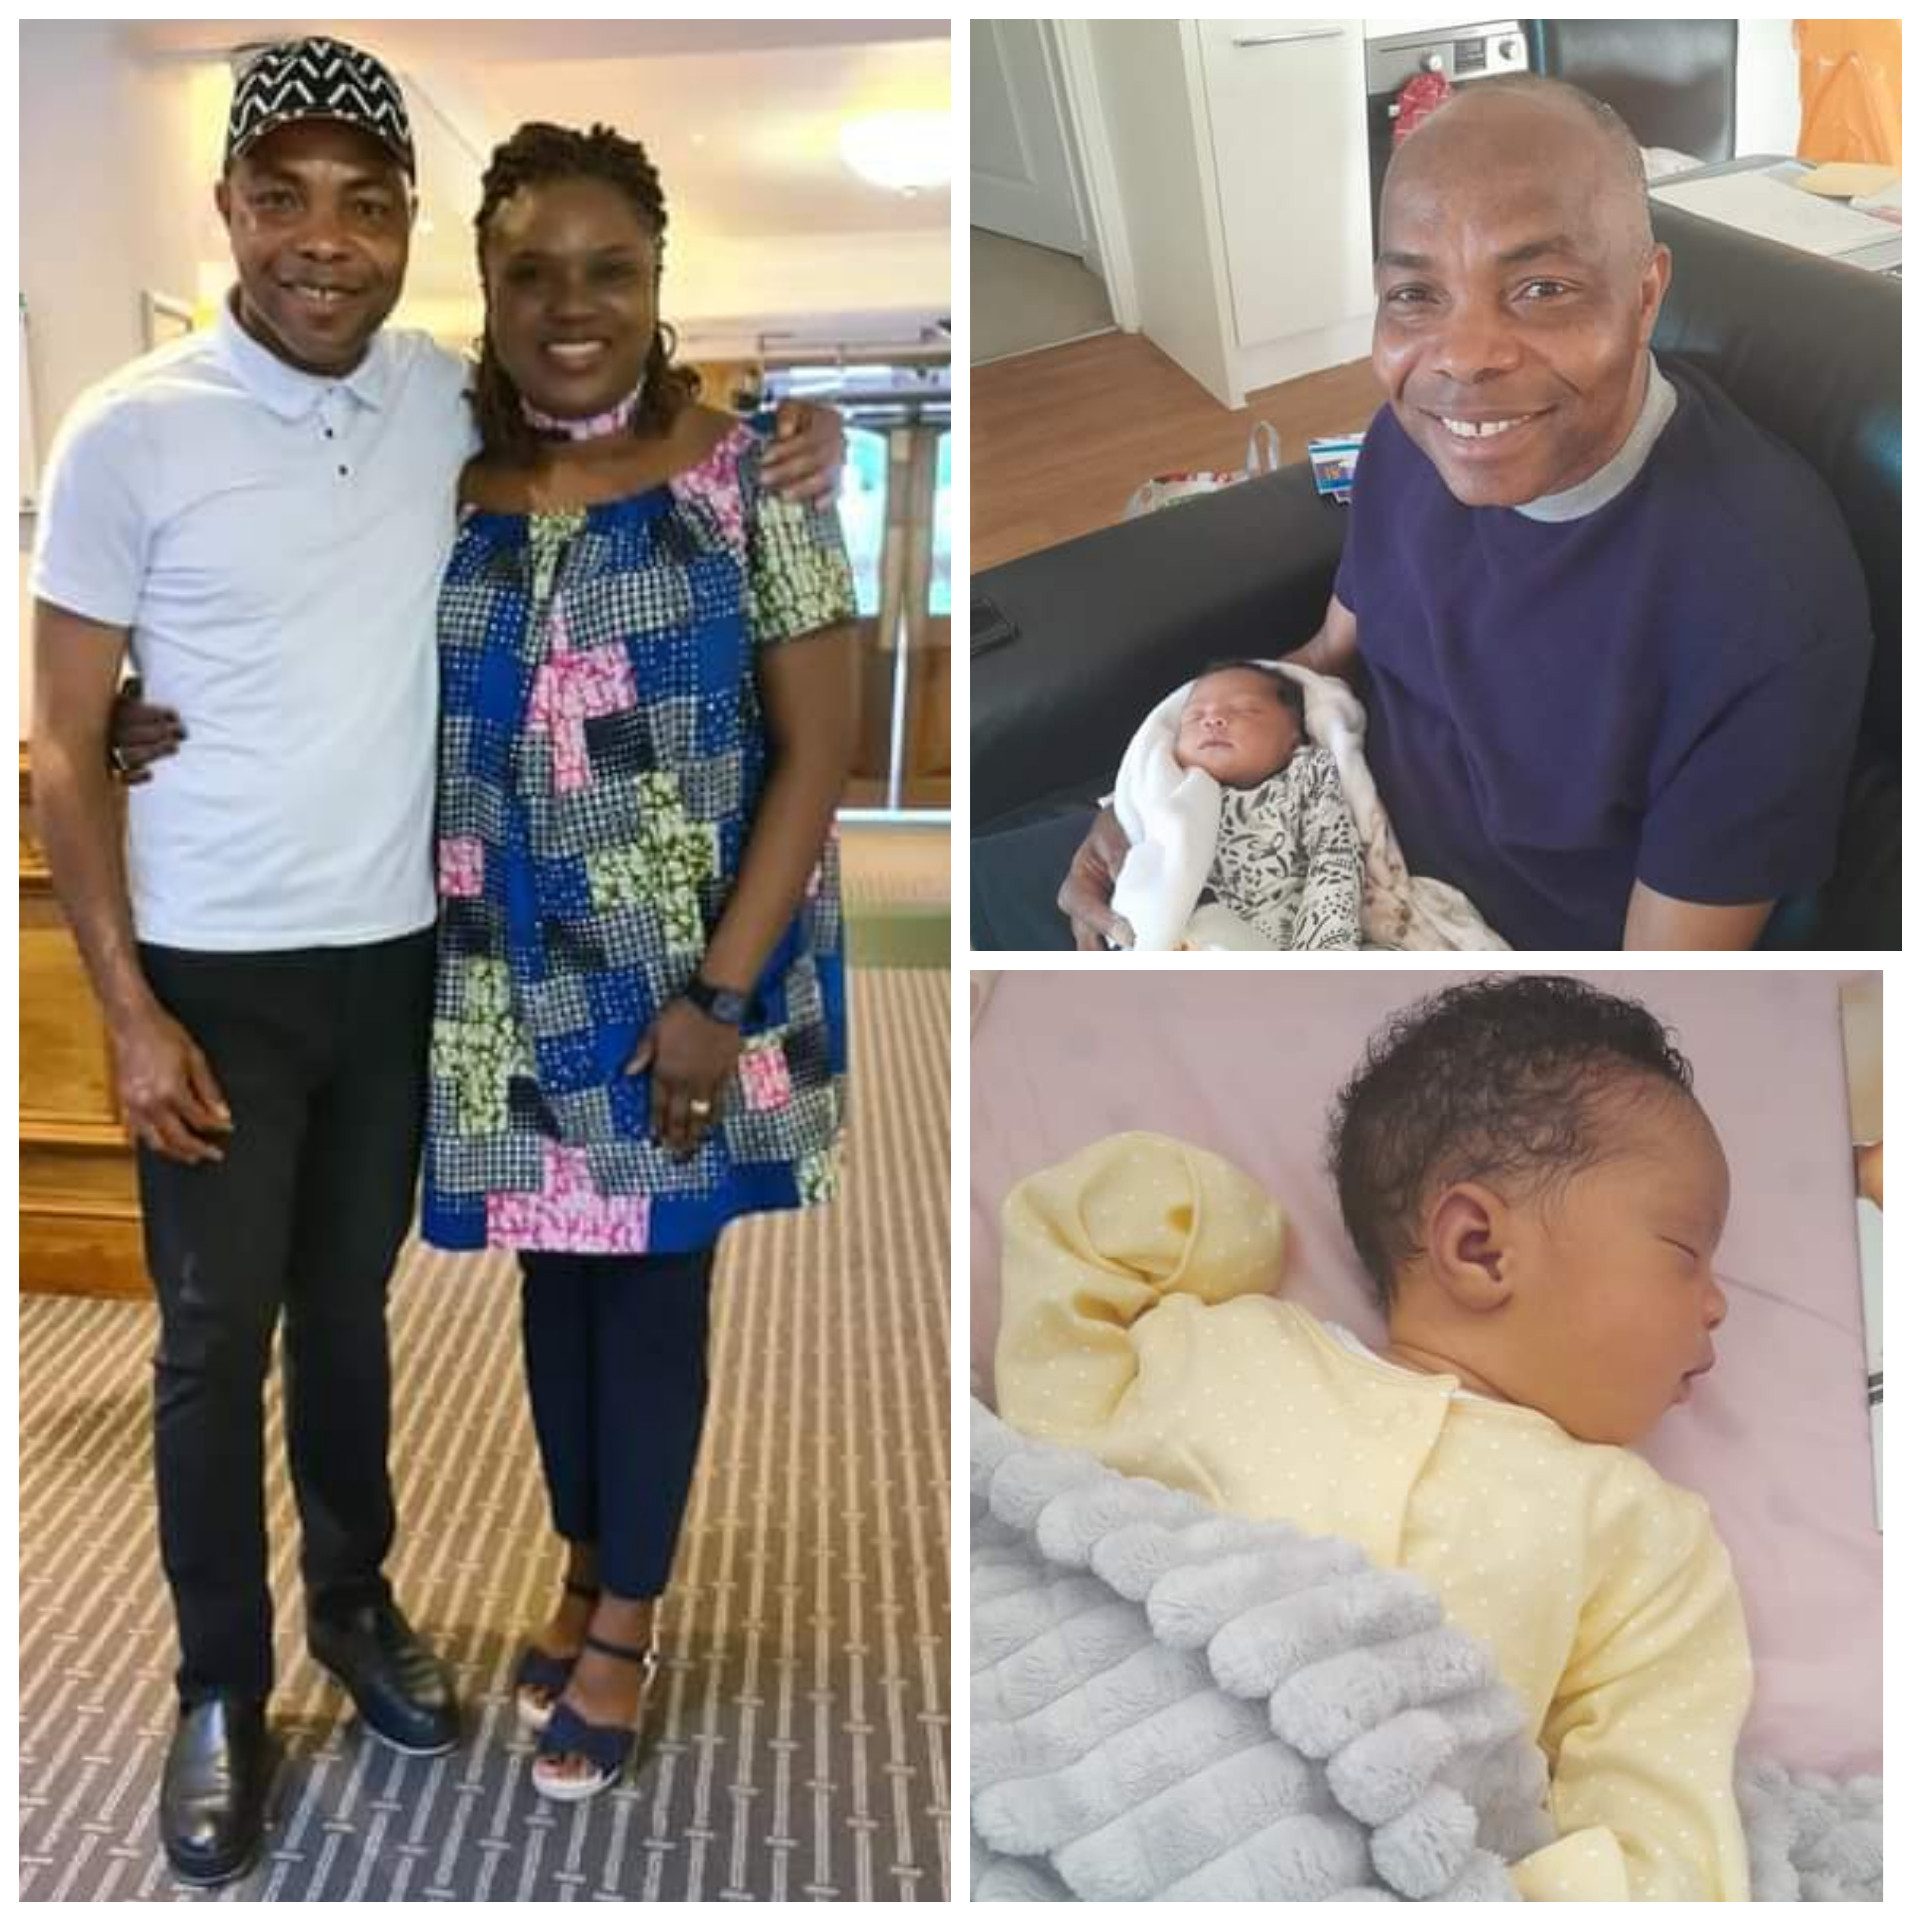 NIGERIAN MAN CELEBRATES AS HE BECOMES A FATHER AFTER 10 YEARS OF MARRIAGE